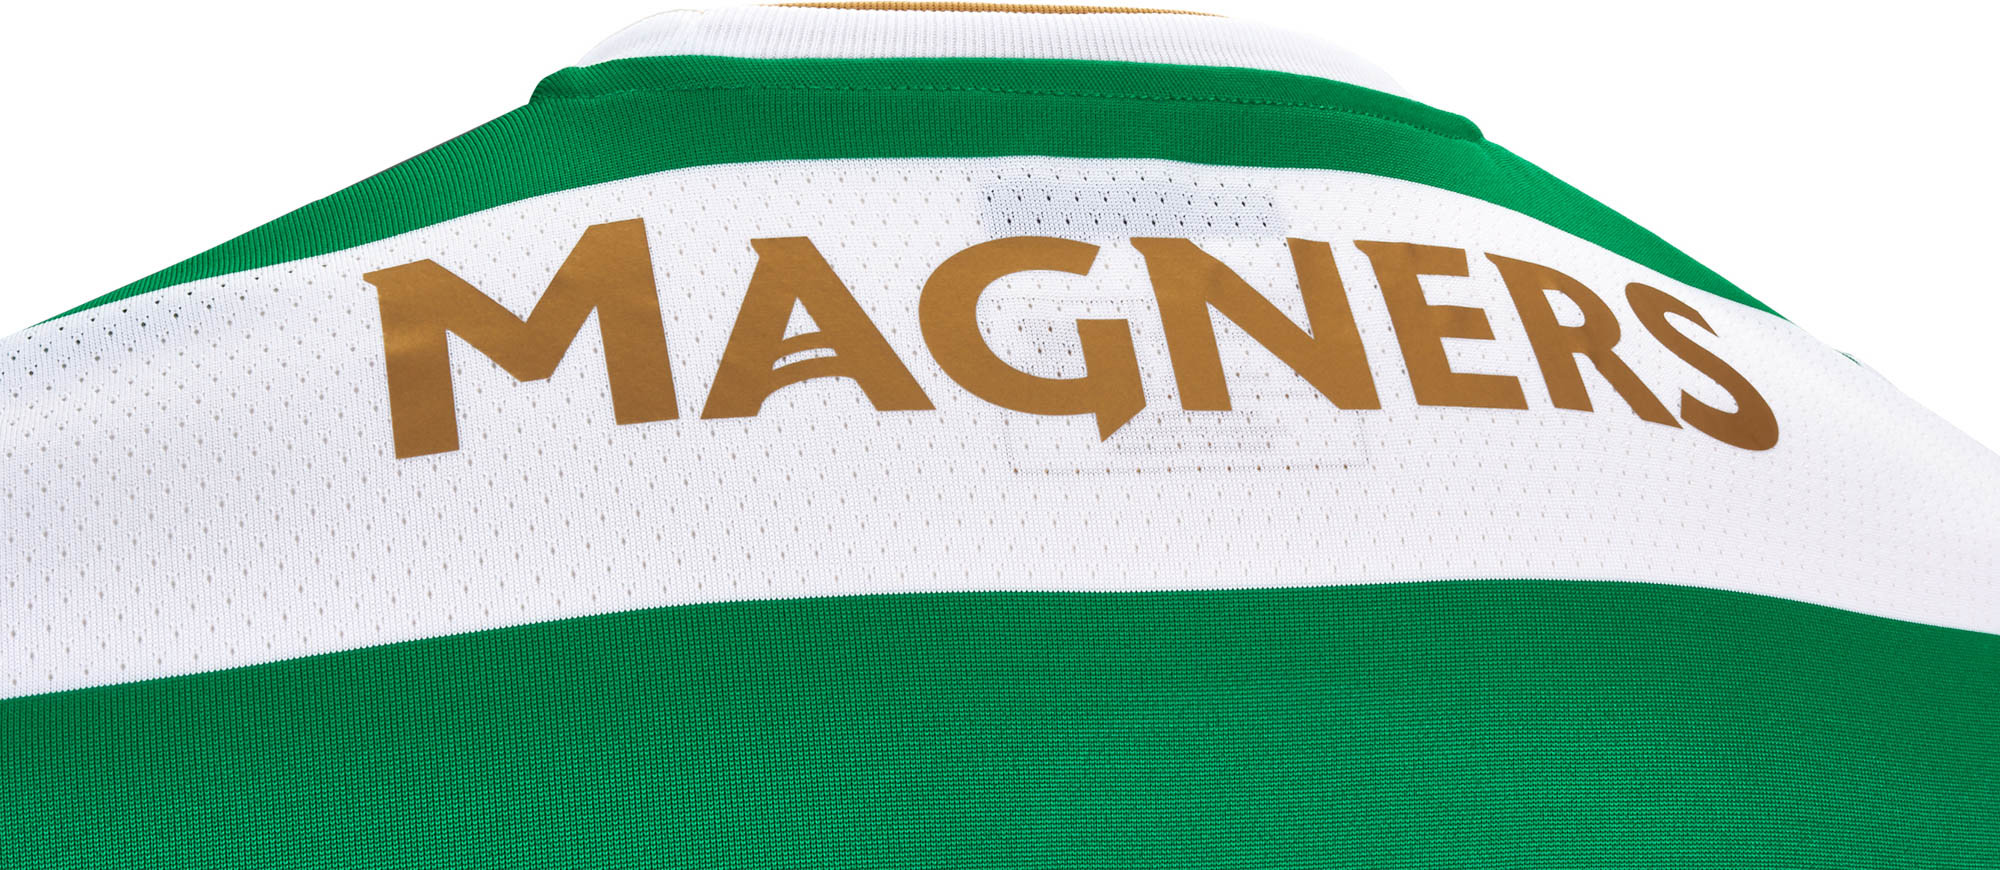 Celtic 16/17 Home Kit by New Balance - SoccerBible